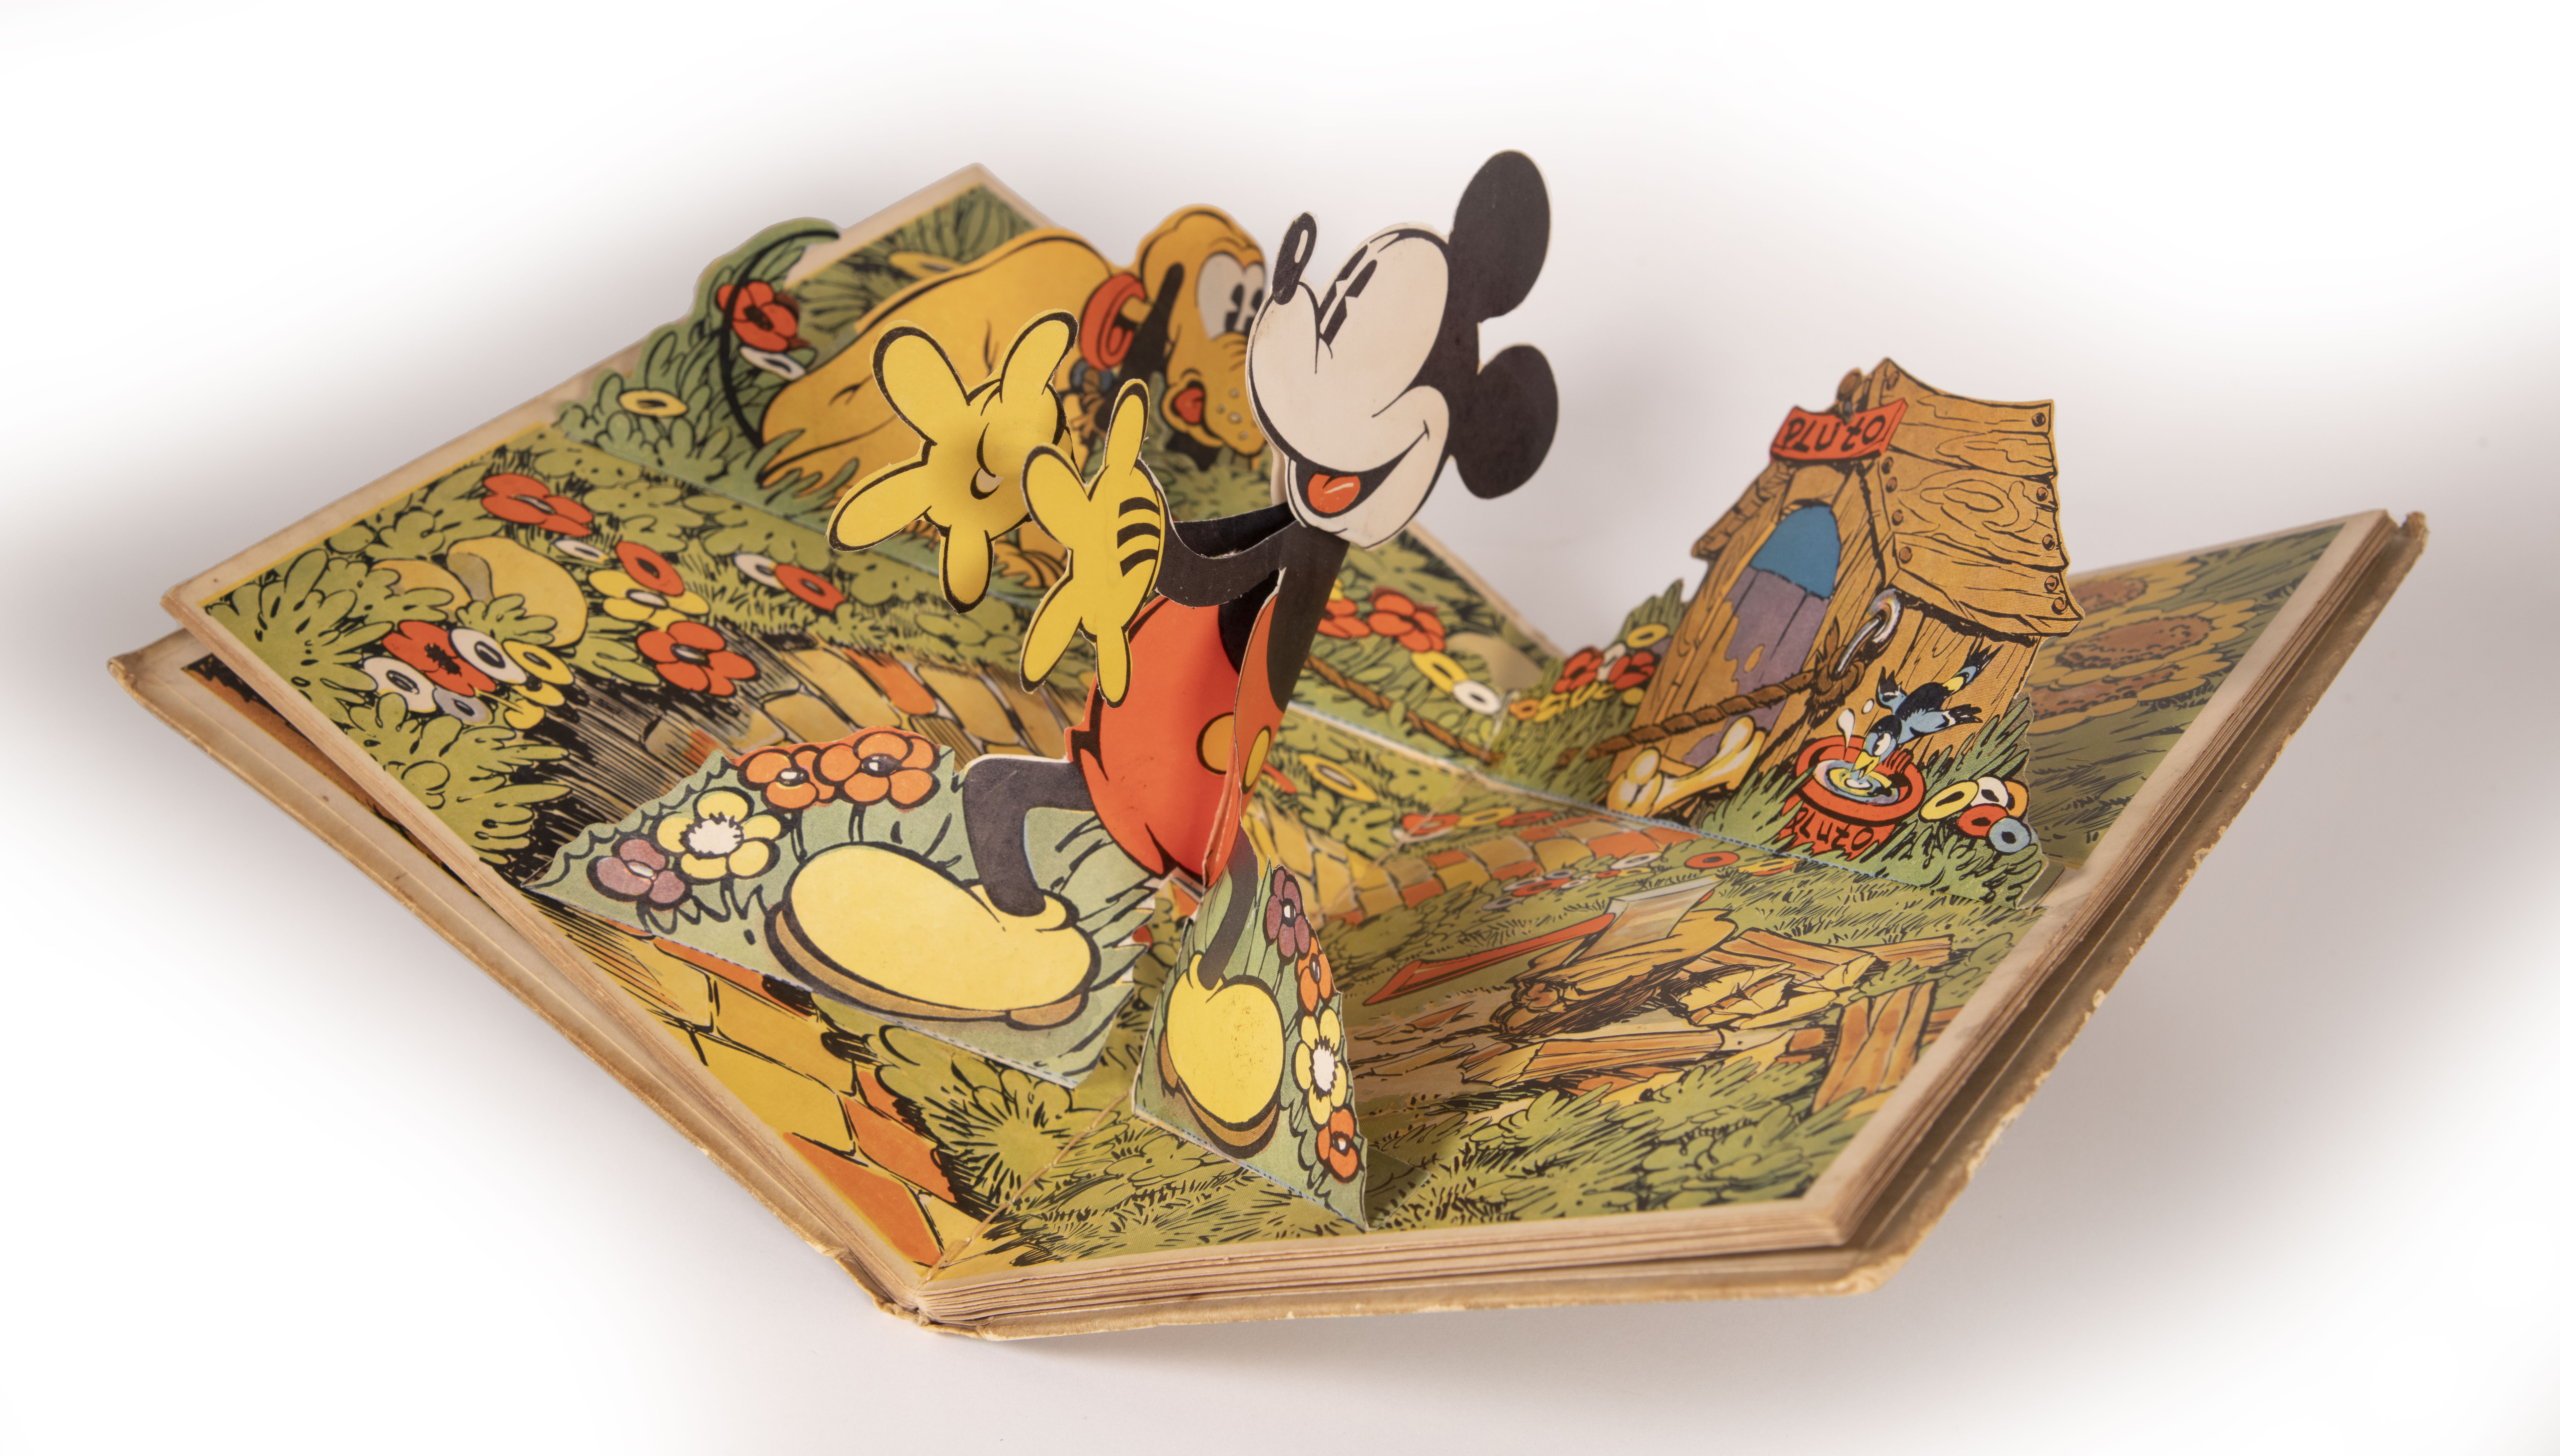 This photo of the book Pop-Up Mickey Mouse features a pop-up of Mickey standing up in his garden with his two arms pointed straight. Meanwhile, a pop-up of Pluto is tied to his doghouse looking perplexed.